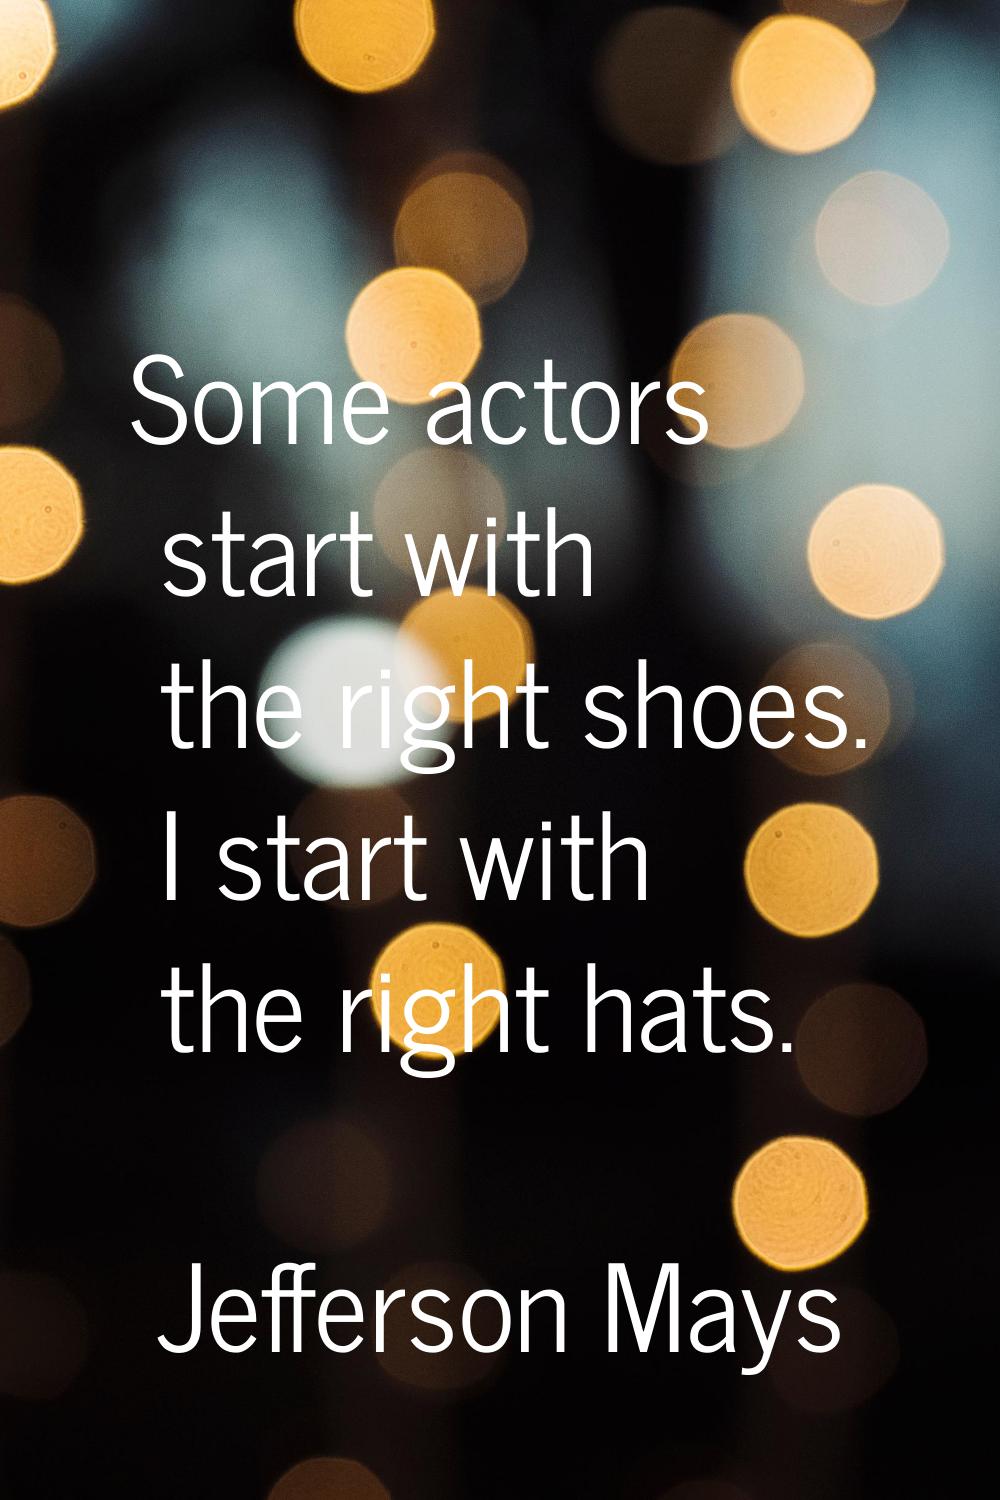 Some actors start with the right shoes. I start with the right hats.